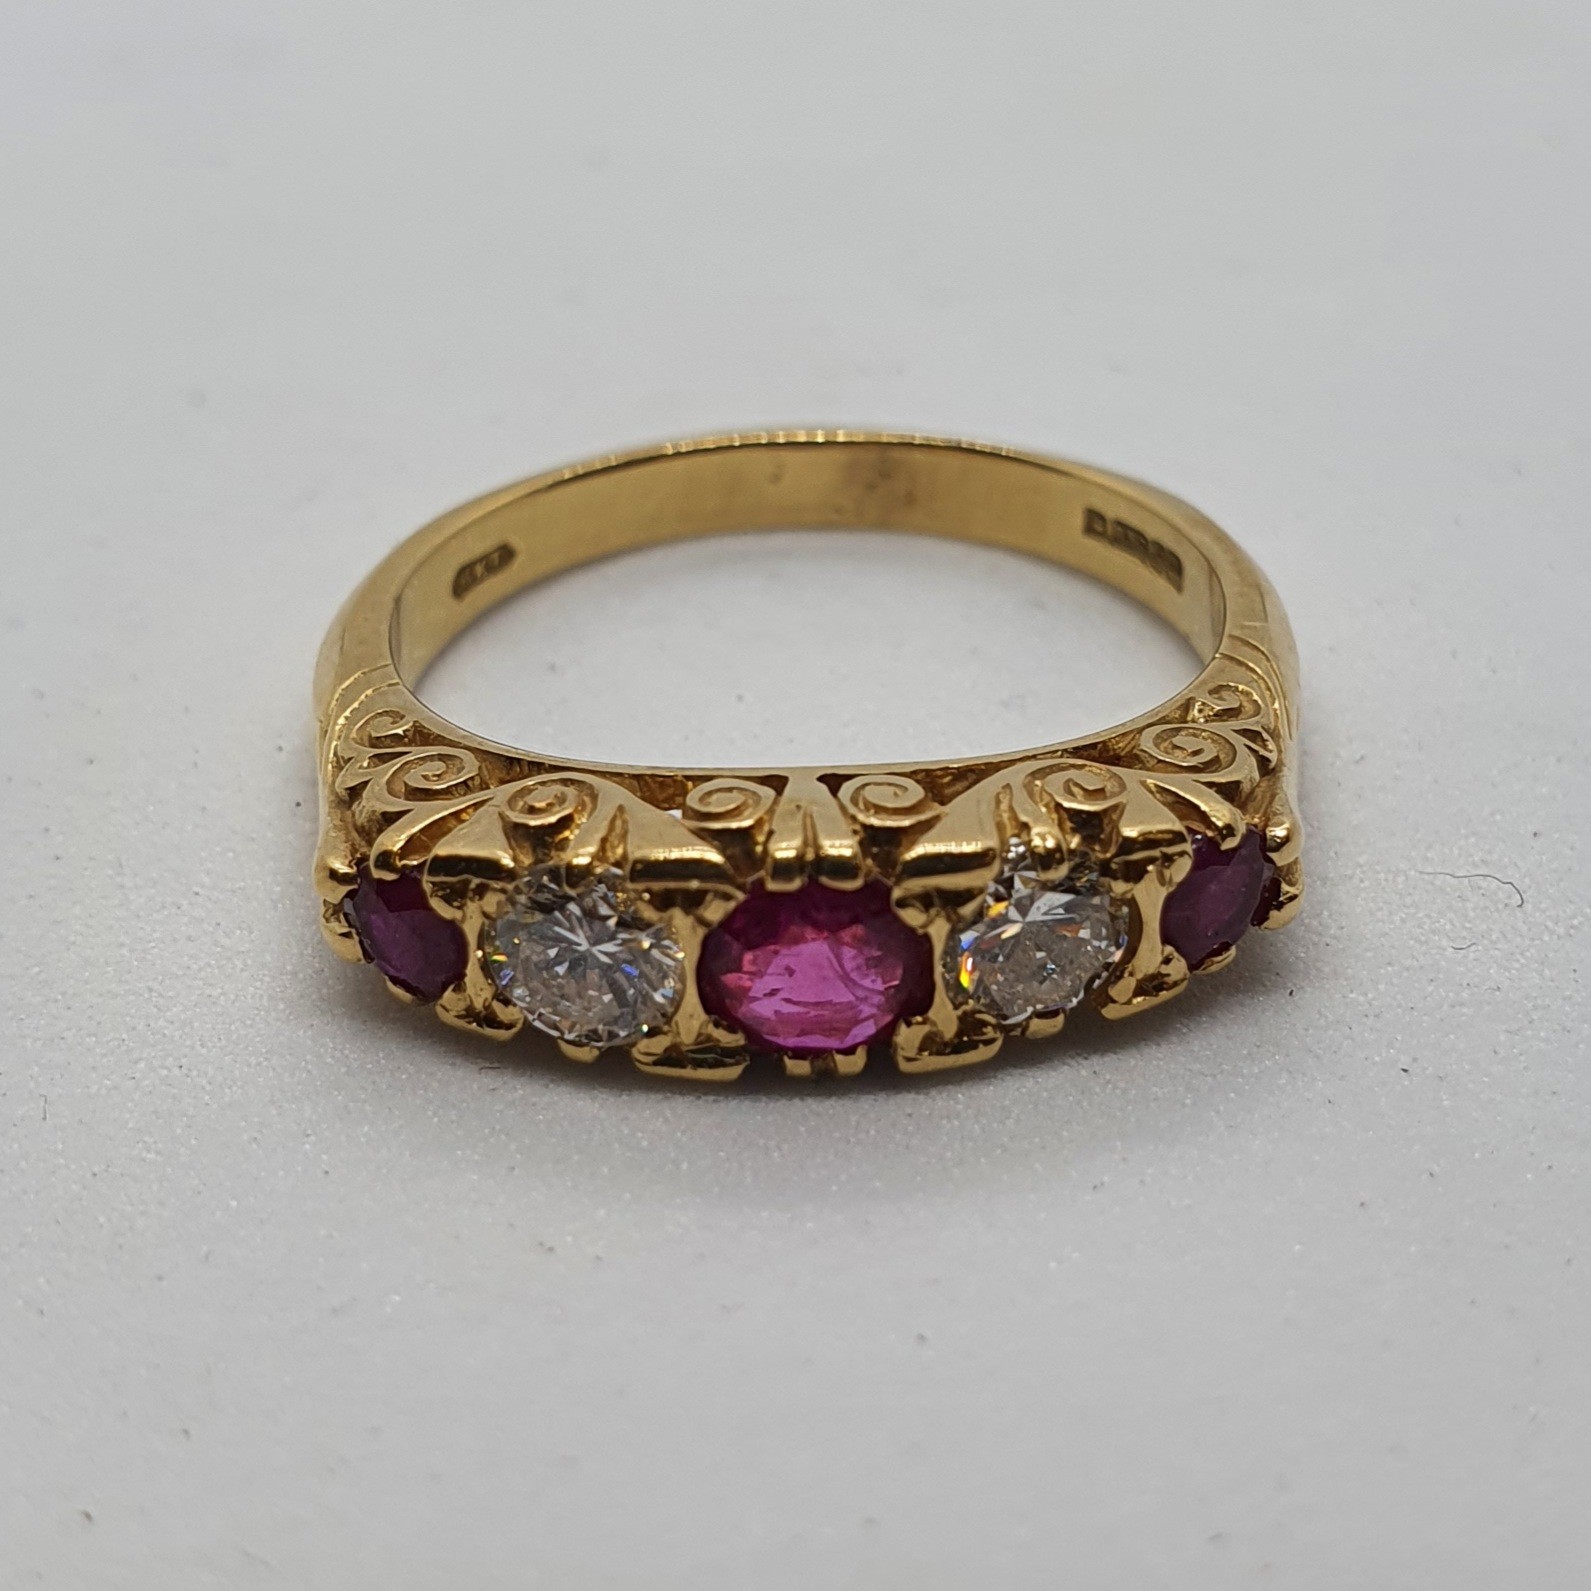 An 18ct gold, diamond and ruby five stone ring, ring size P 1/2 5.8 g all in overall condition